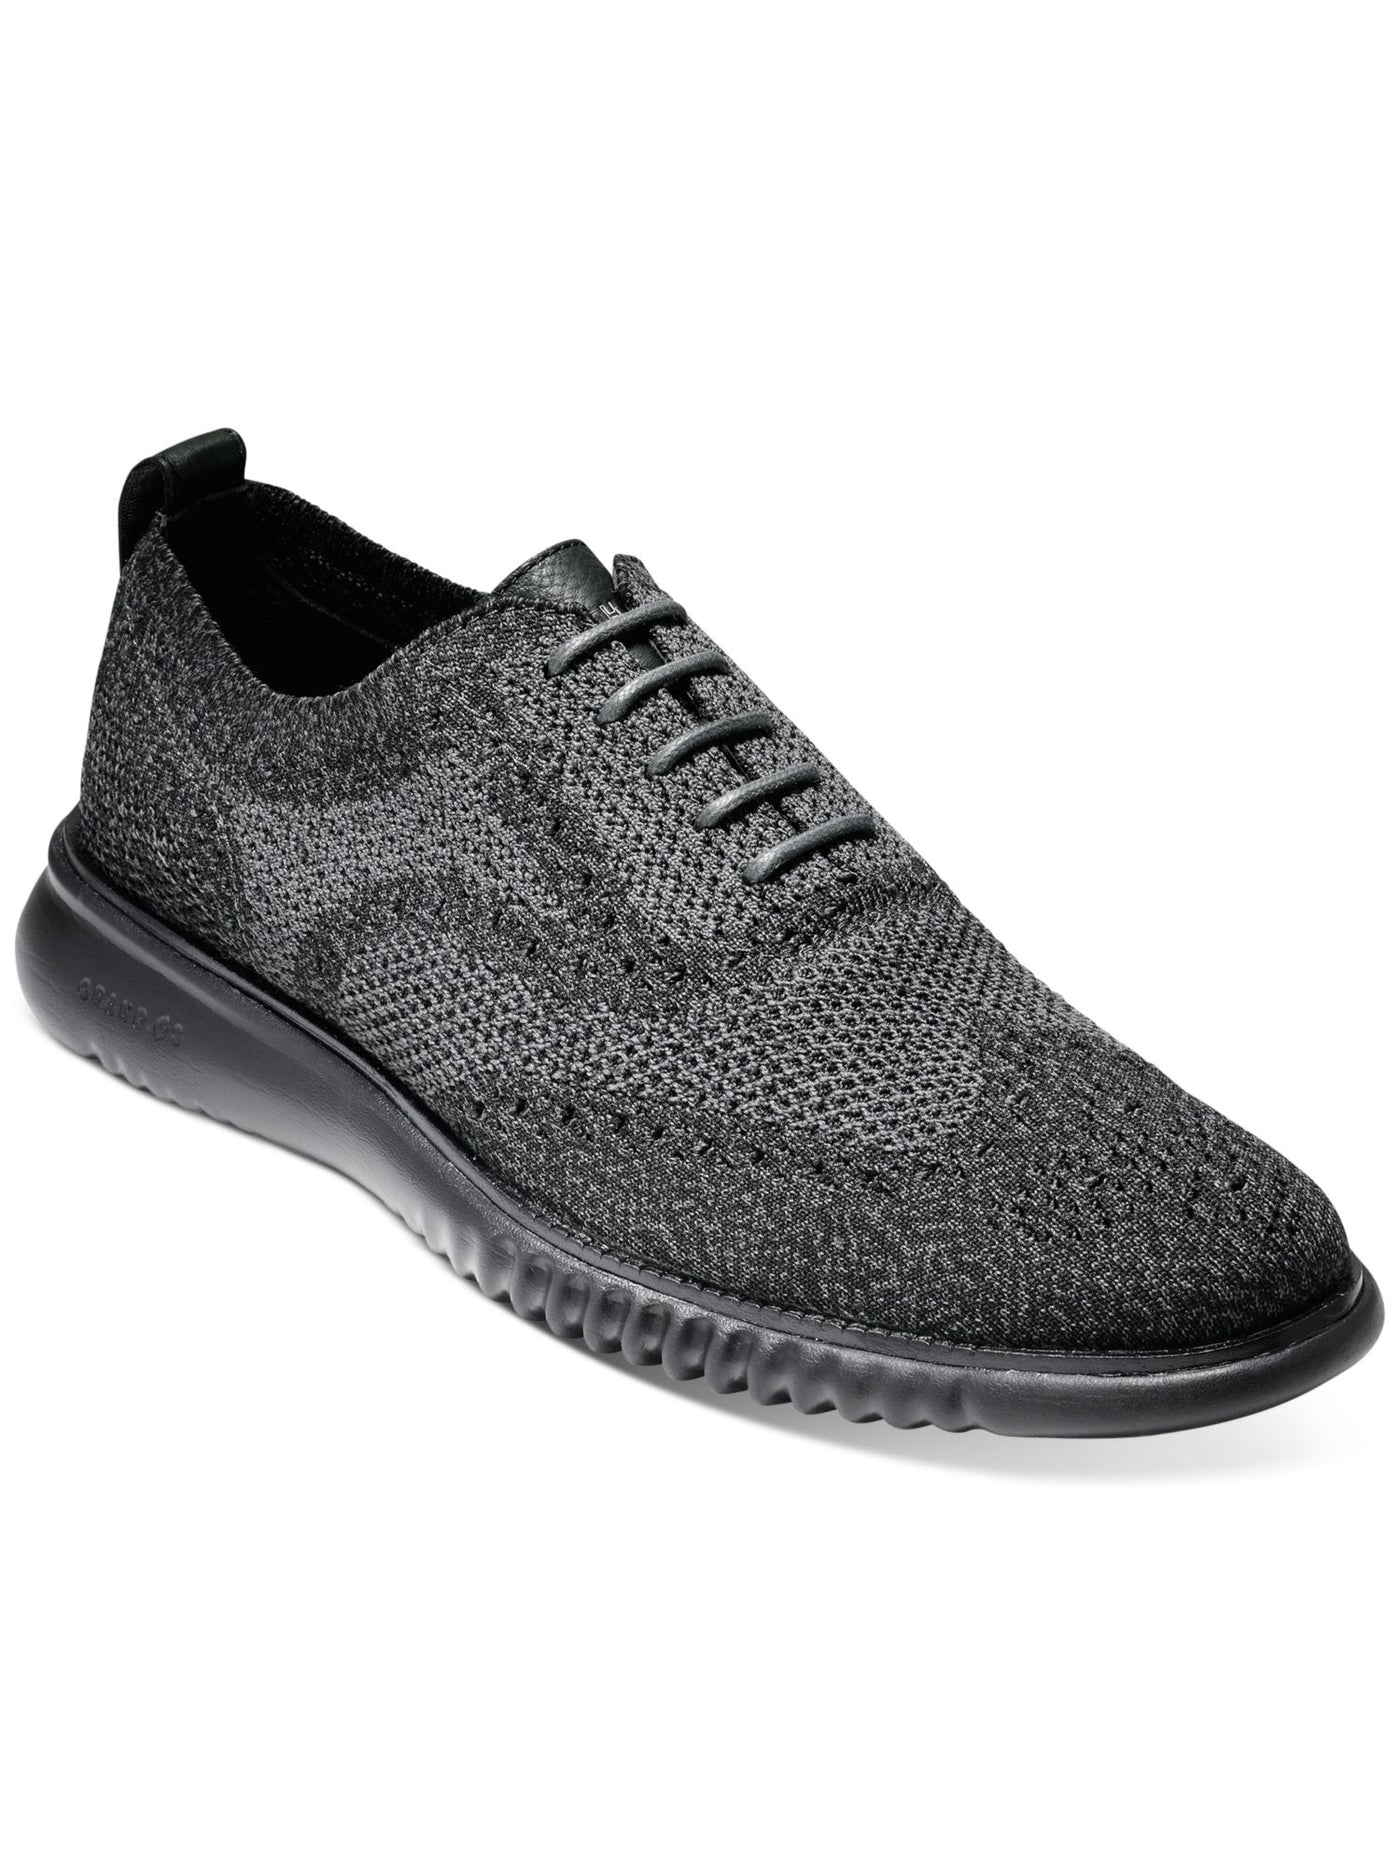 COLE HAAN Mens Black Colorblock Knit Back Pull-Tab Padded 2.zer�grand Wingtip Toe Wedge Lace-Up Oxford Shoes 13 M